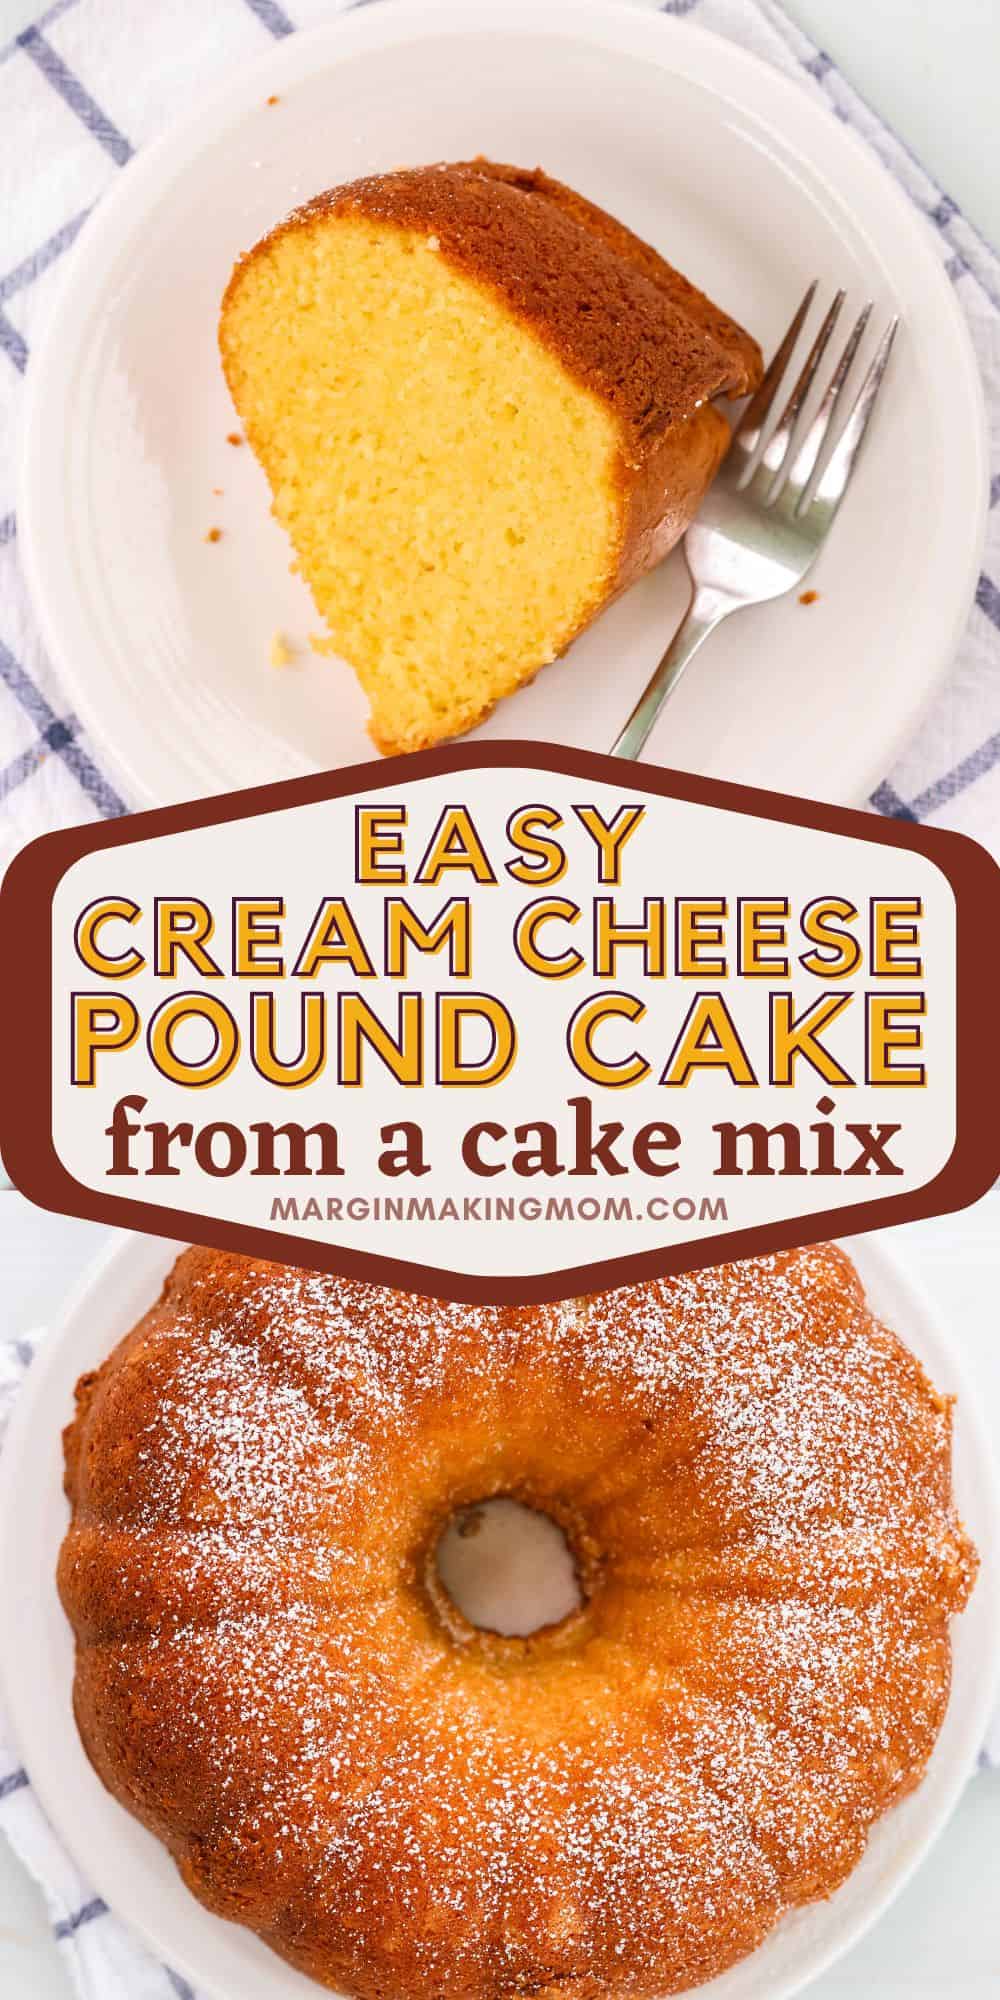 two photos; one shows a slice of cream cheese pound cake from a mix, served on a white plate. The other shows a whole bundt cake.